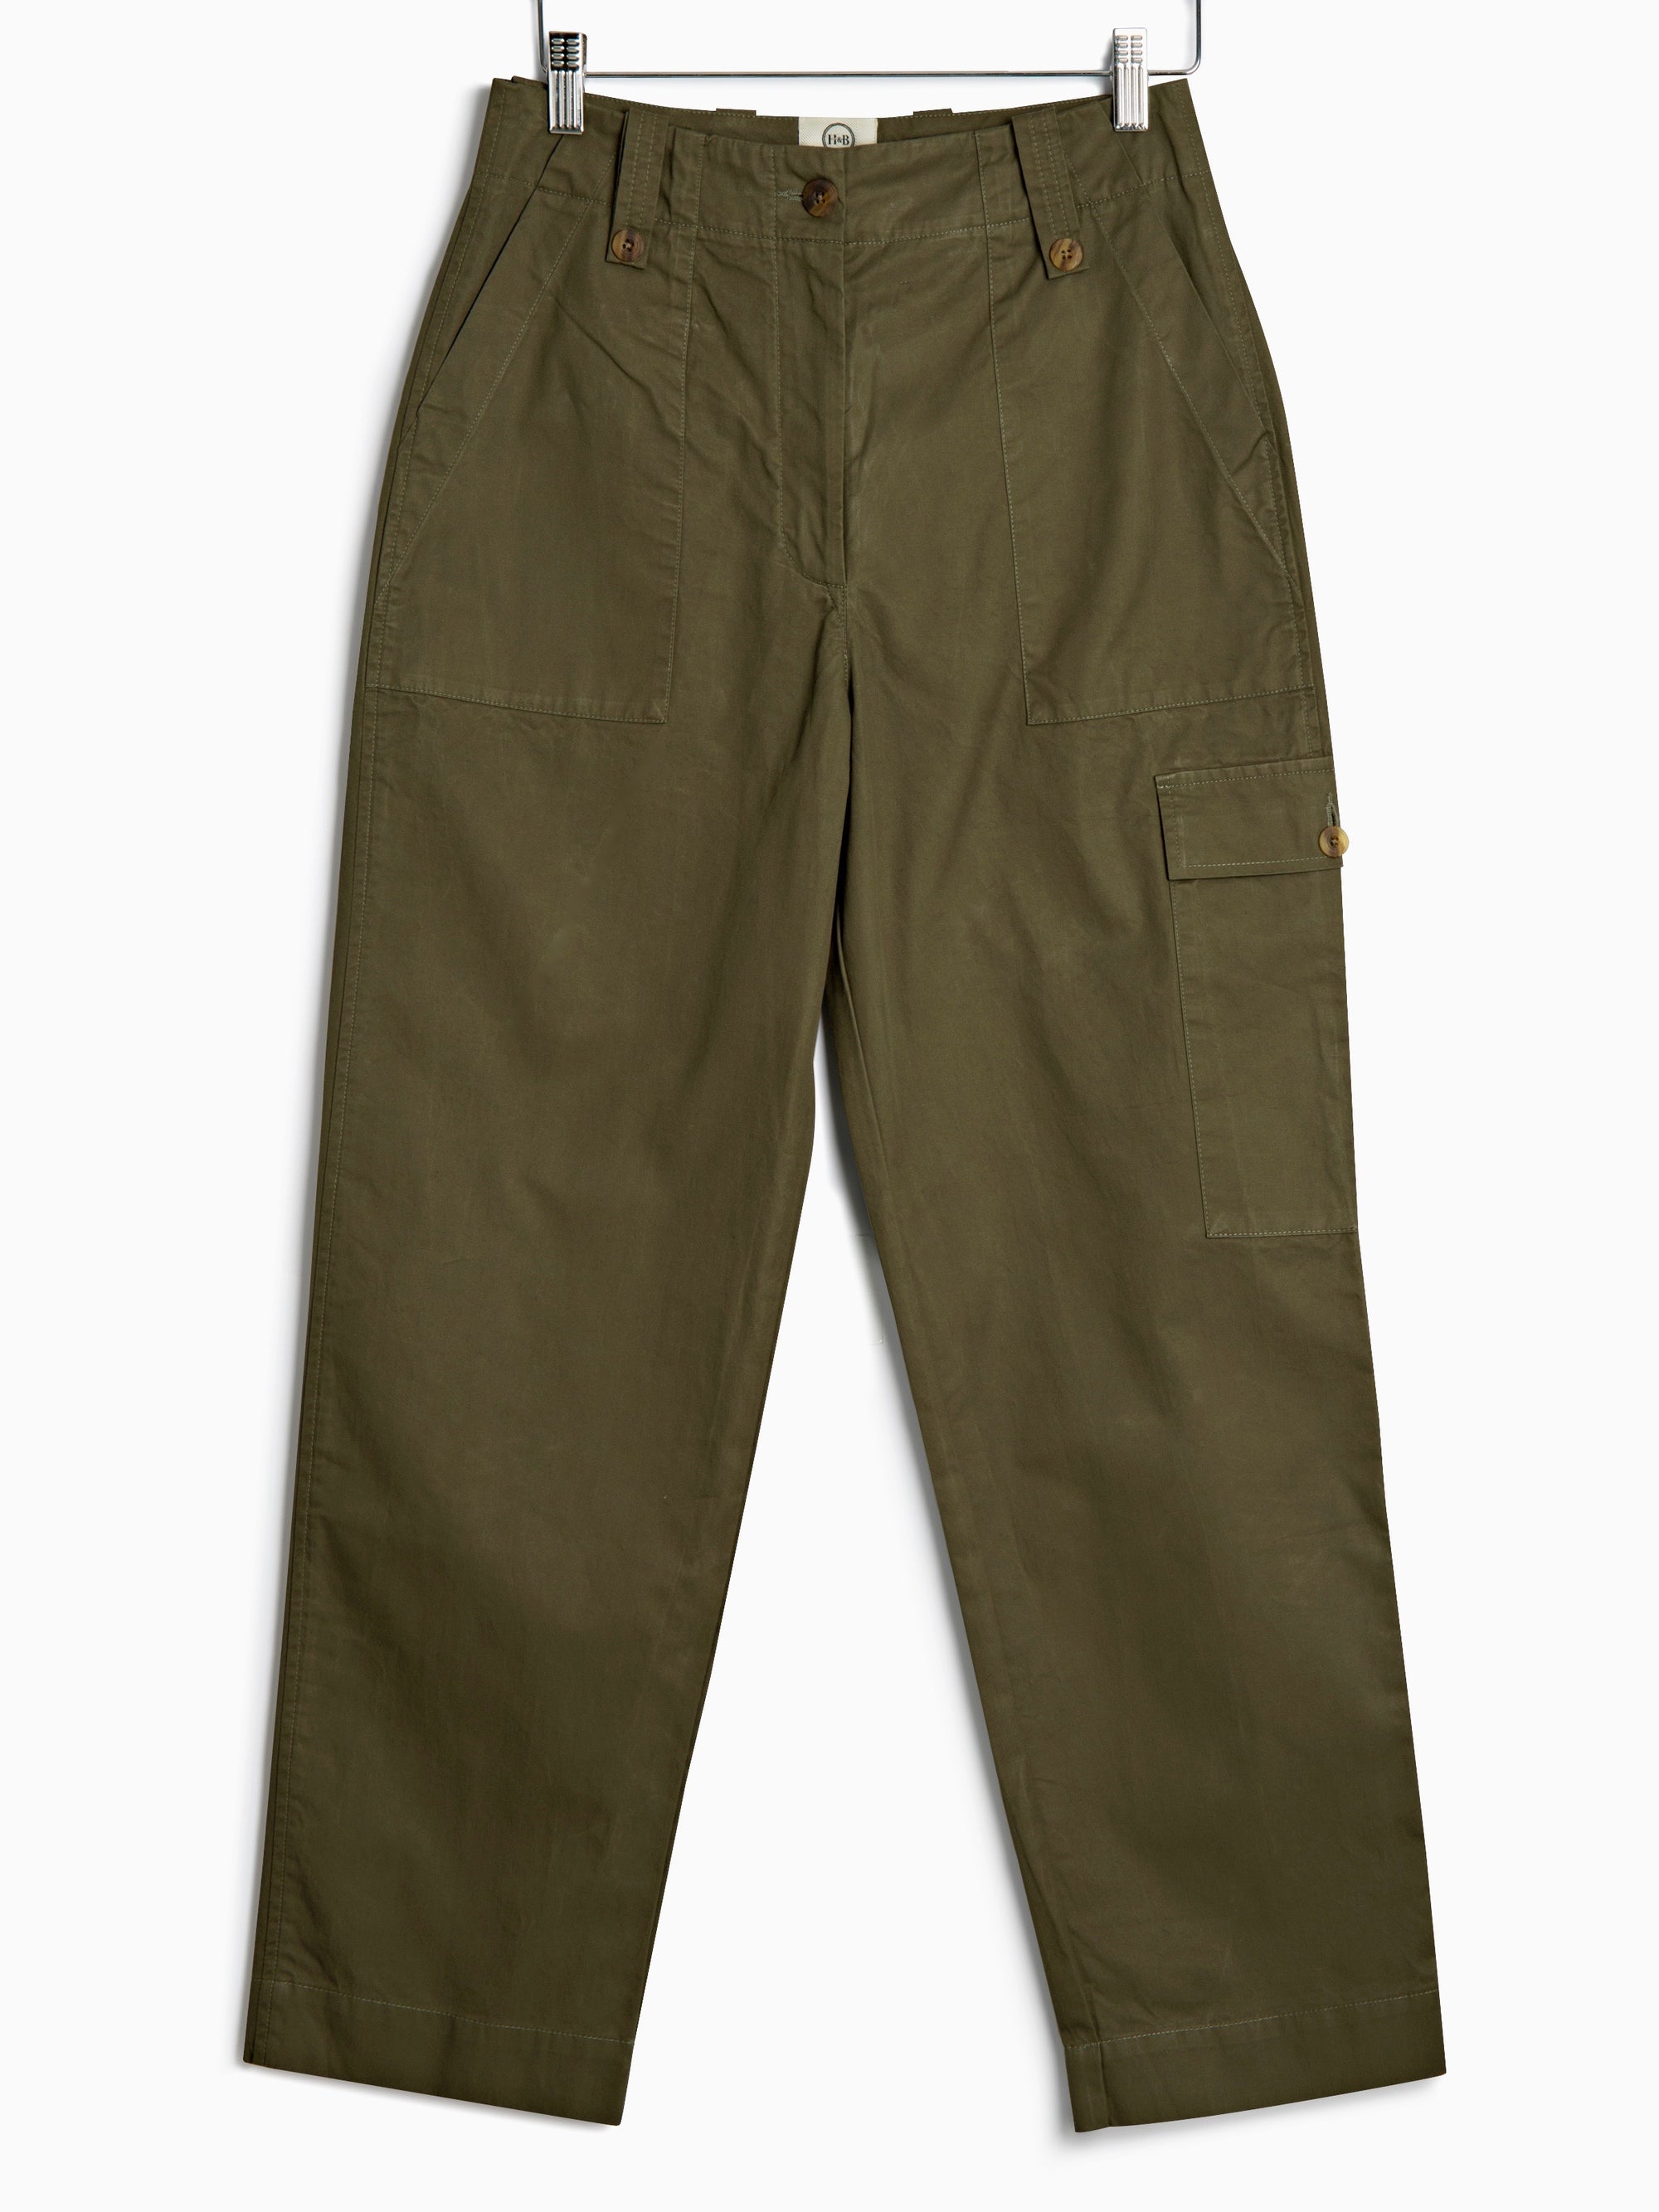 Military Style Cargo Pants, Trousers, Hickman & Bousfield - Hickman & Bousfield, Safari and Travel Clothing